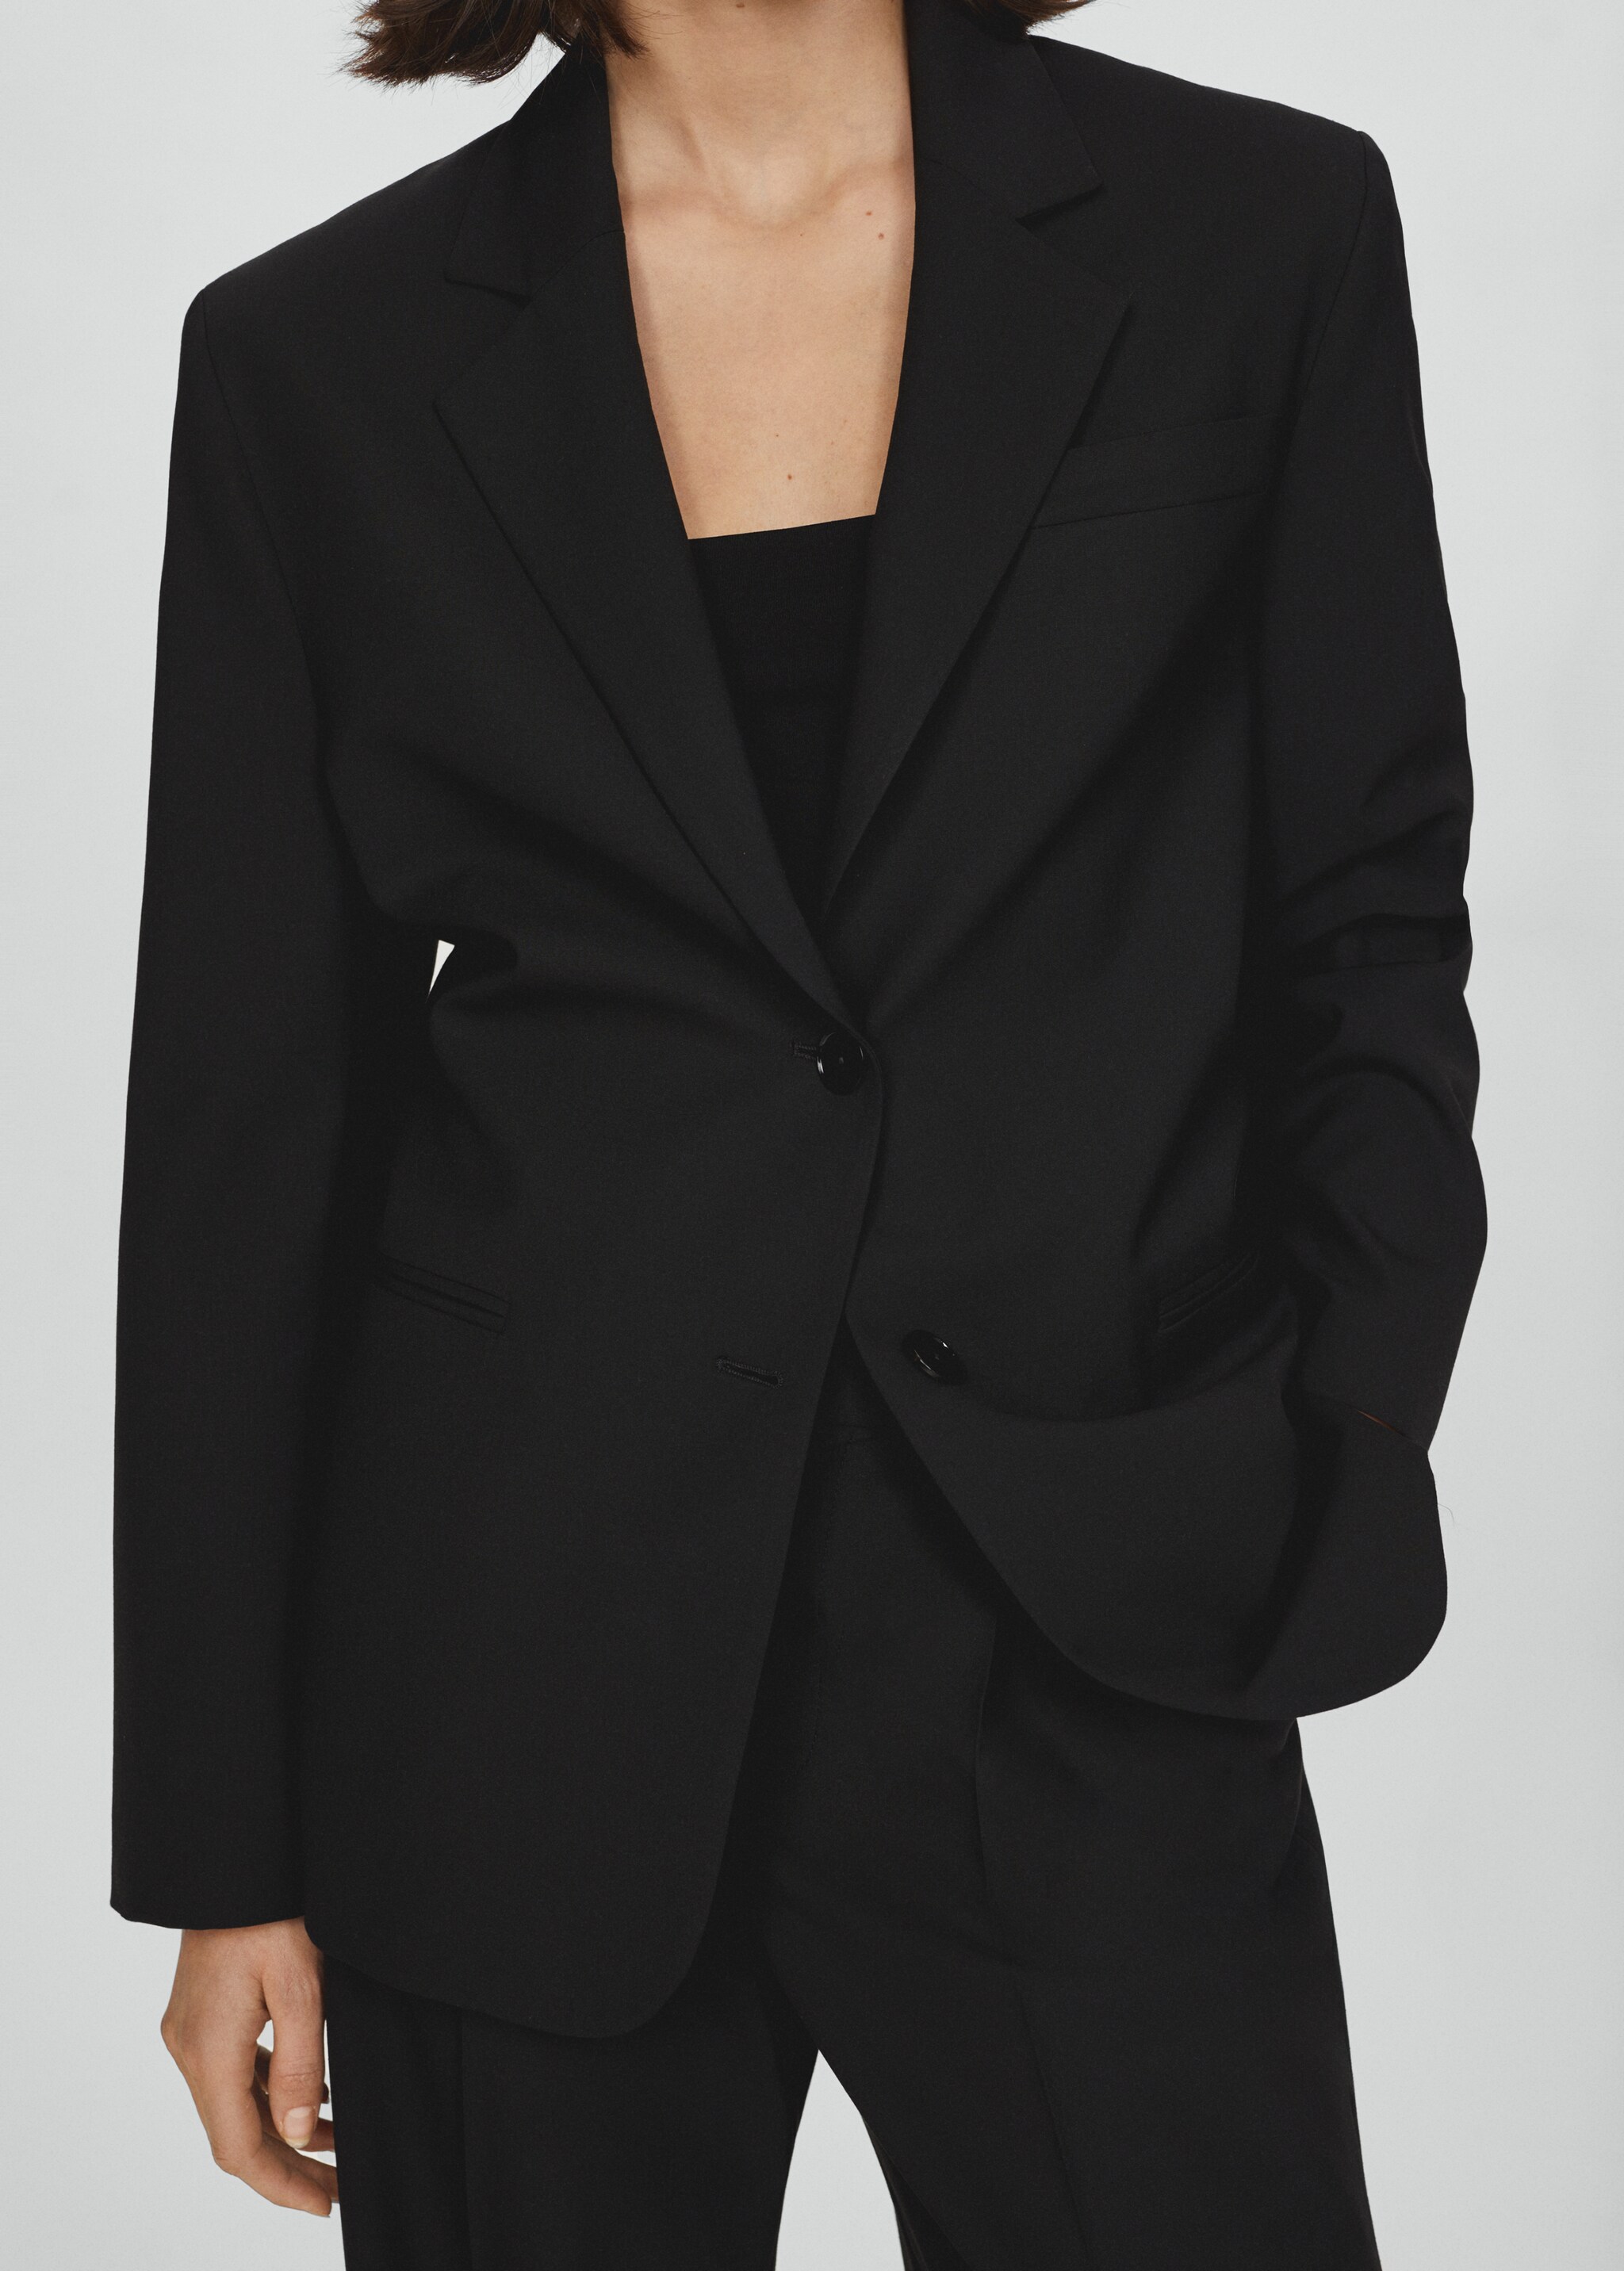 Suit blazer with buttons - Details of the article 6